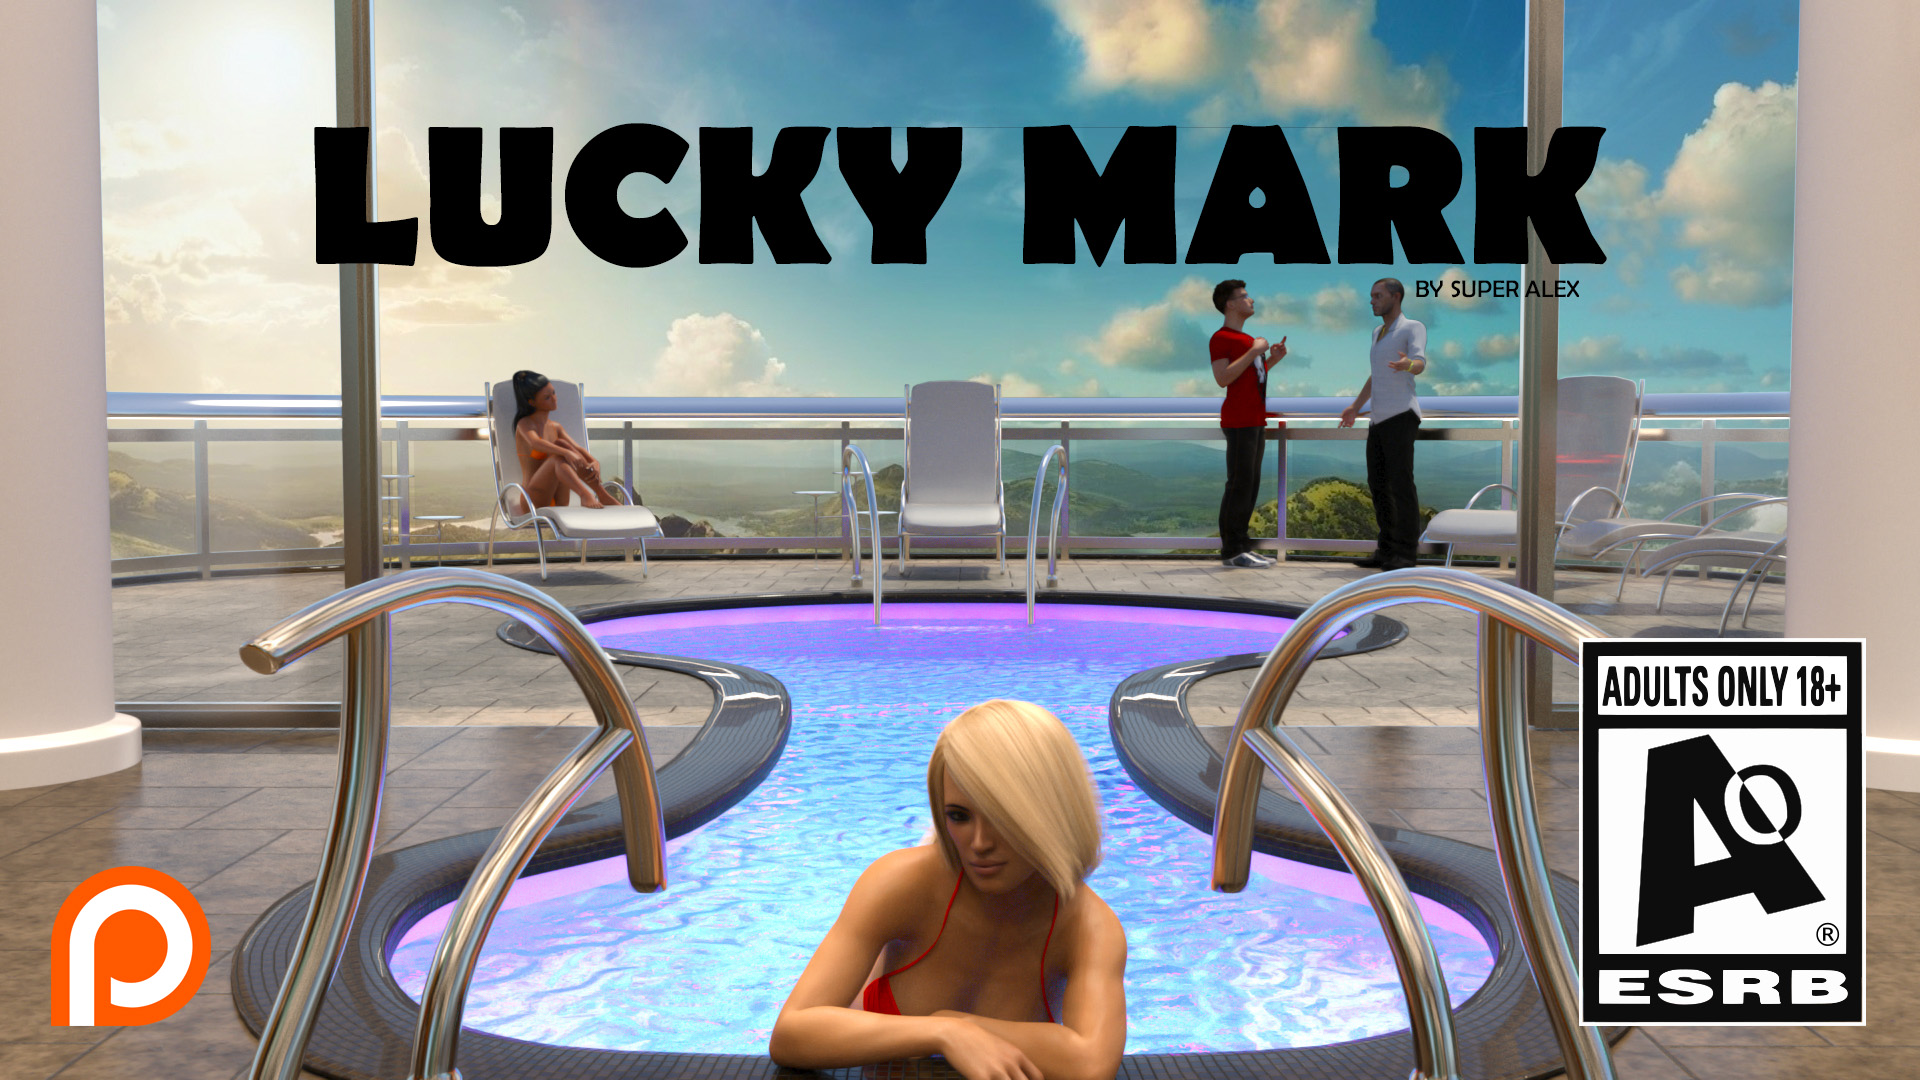 DOWNLOAD Porn Game: Lucky Mark Version 12.0 by Super Alex